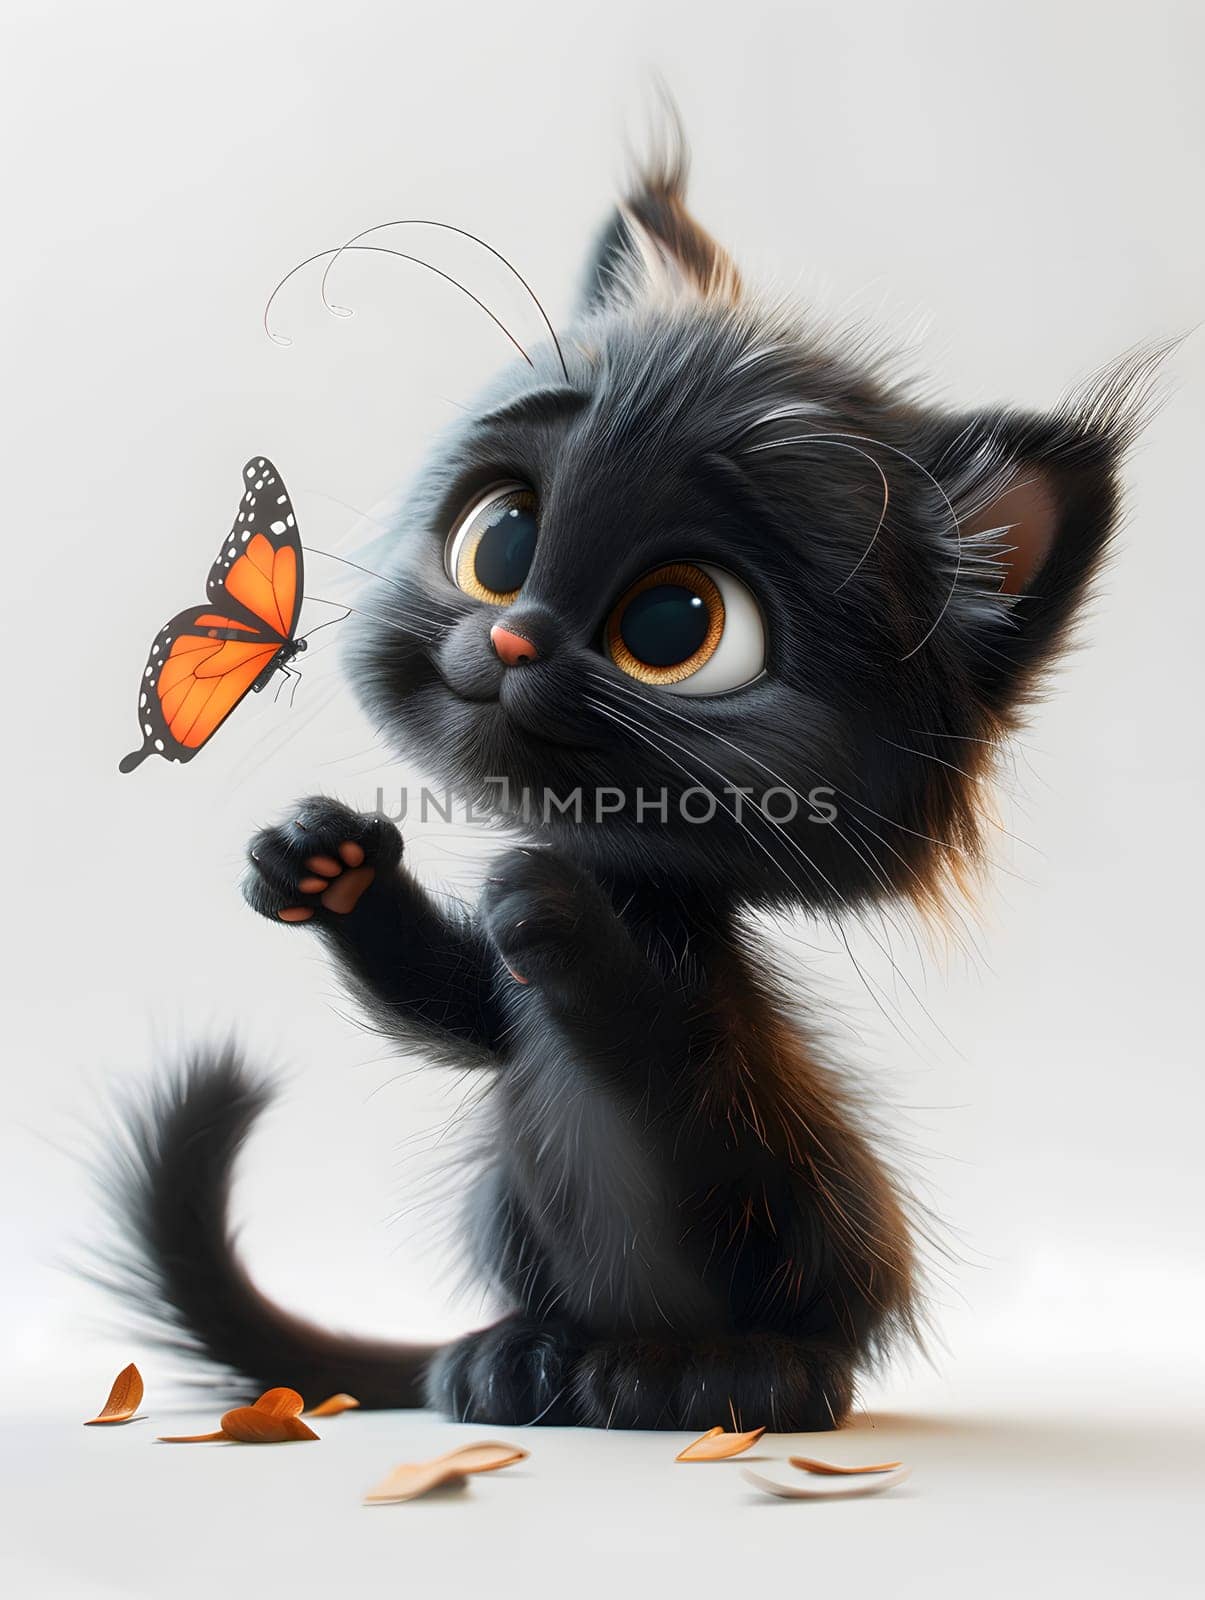 A Felidae kitten, a carnivorous small to mediumsized cat, is playfully swatting at a butterfly with its paw. The insect, a pollinator, flutters around the kitten like a toy, landing on its whiskers